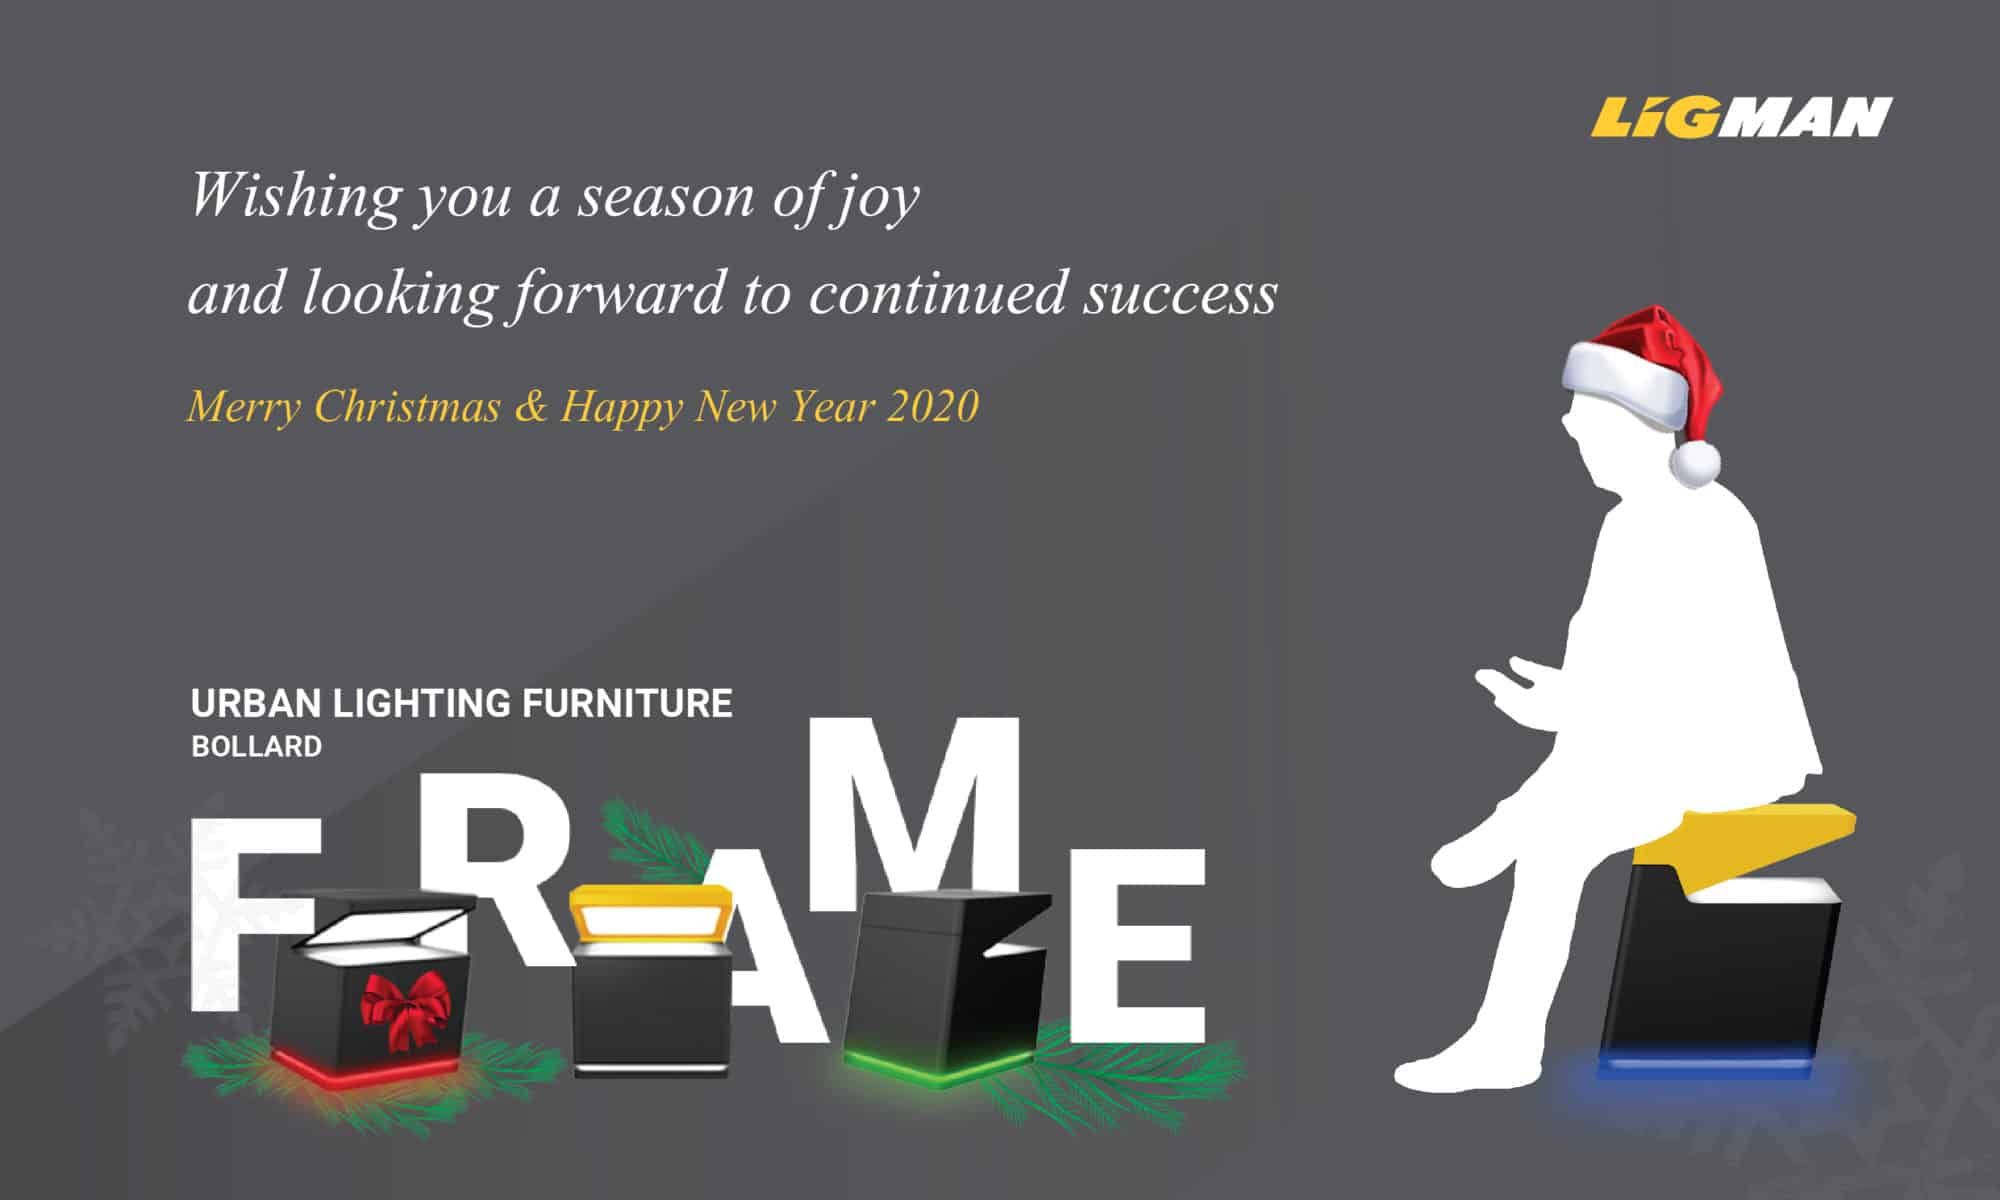 Merry Christmas and a Happy New Year from LIGMAN